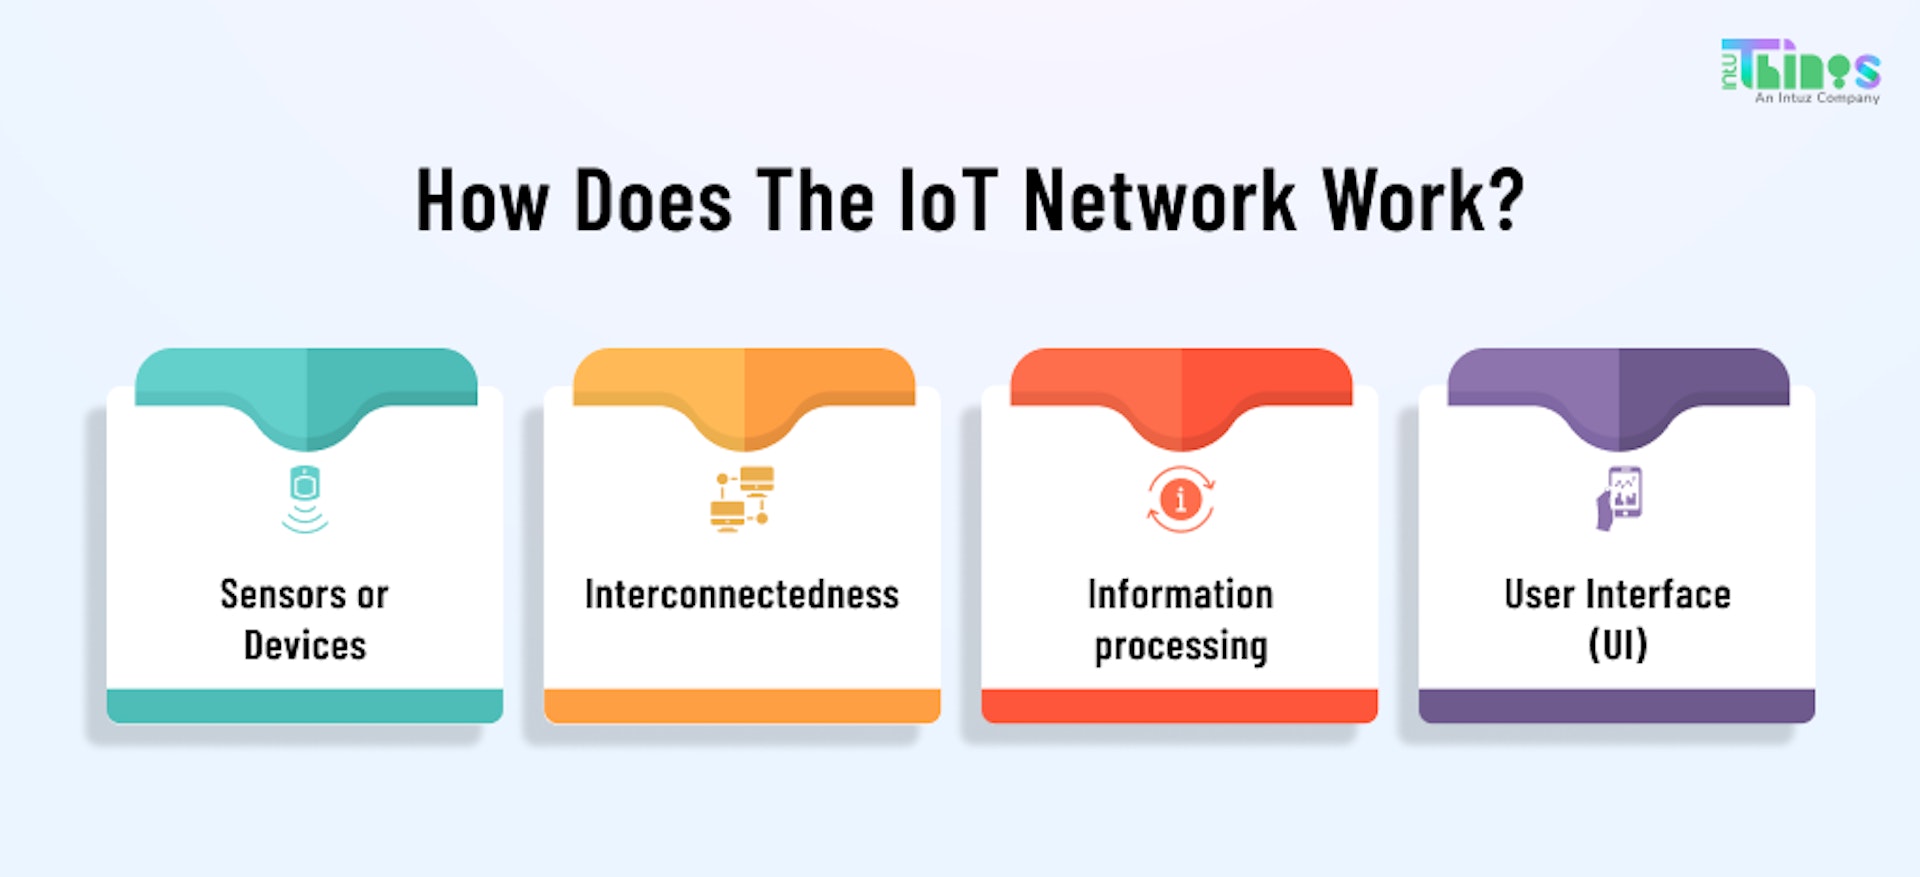 How Does the IoT Network Work